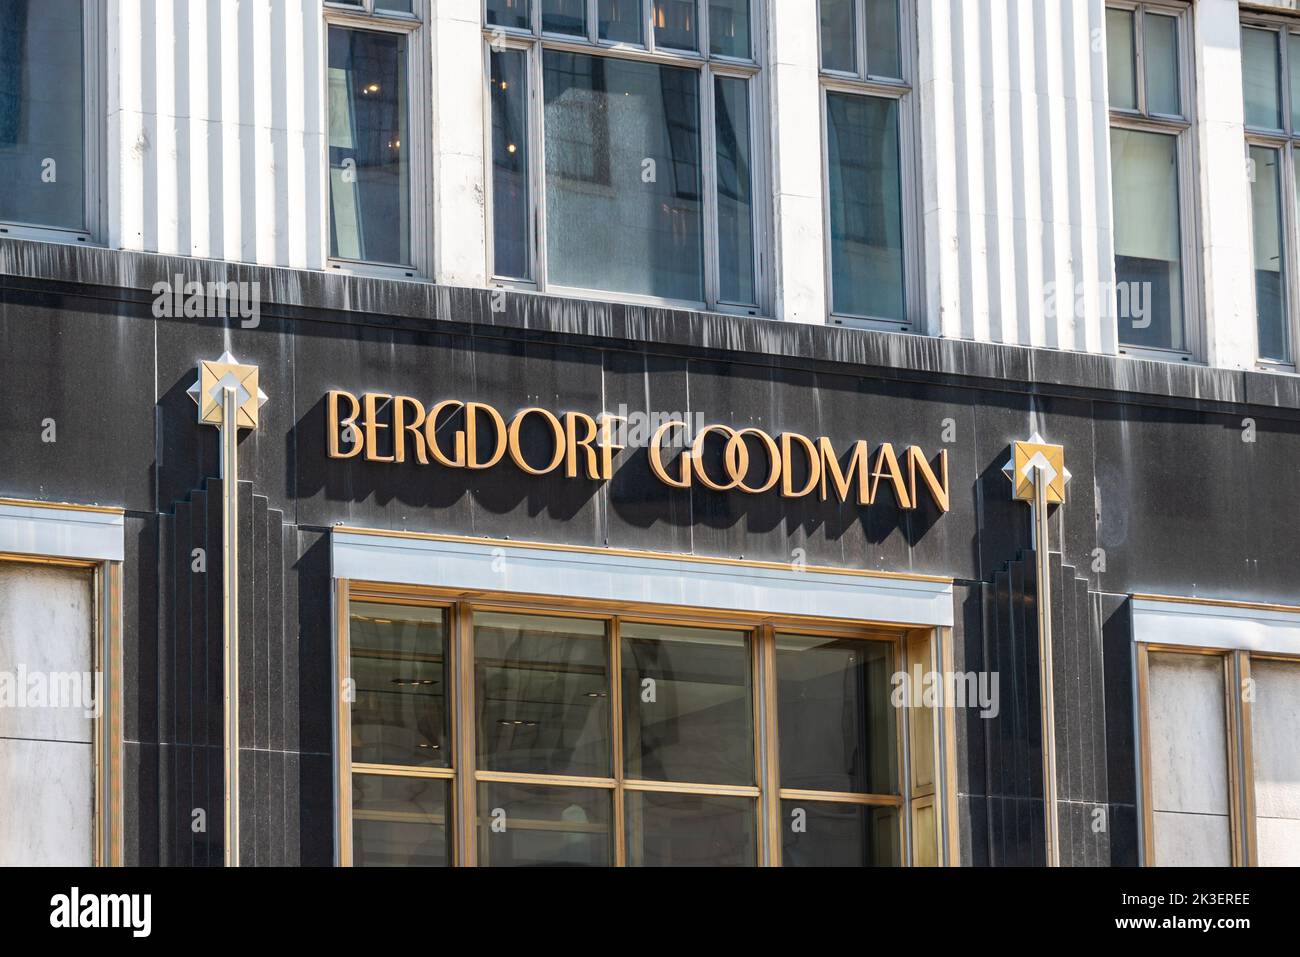 Bergdorf Goodman Entrance 5th Avenue New York Photograph by DW labs  Incorporated - Pixels